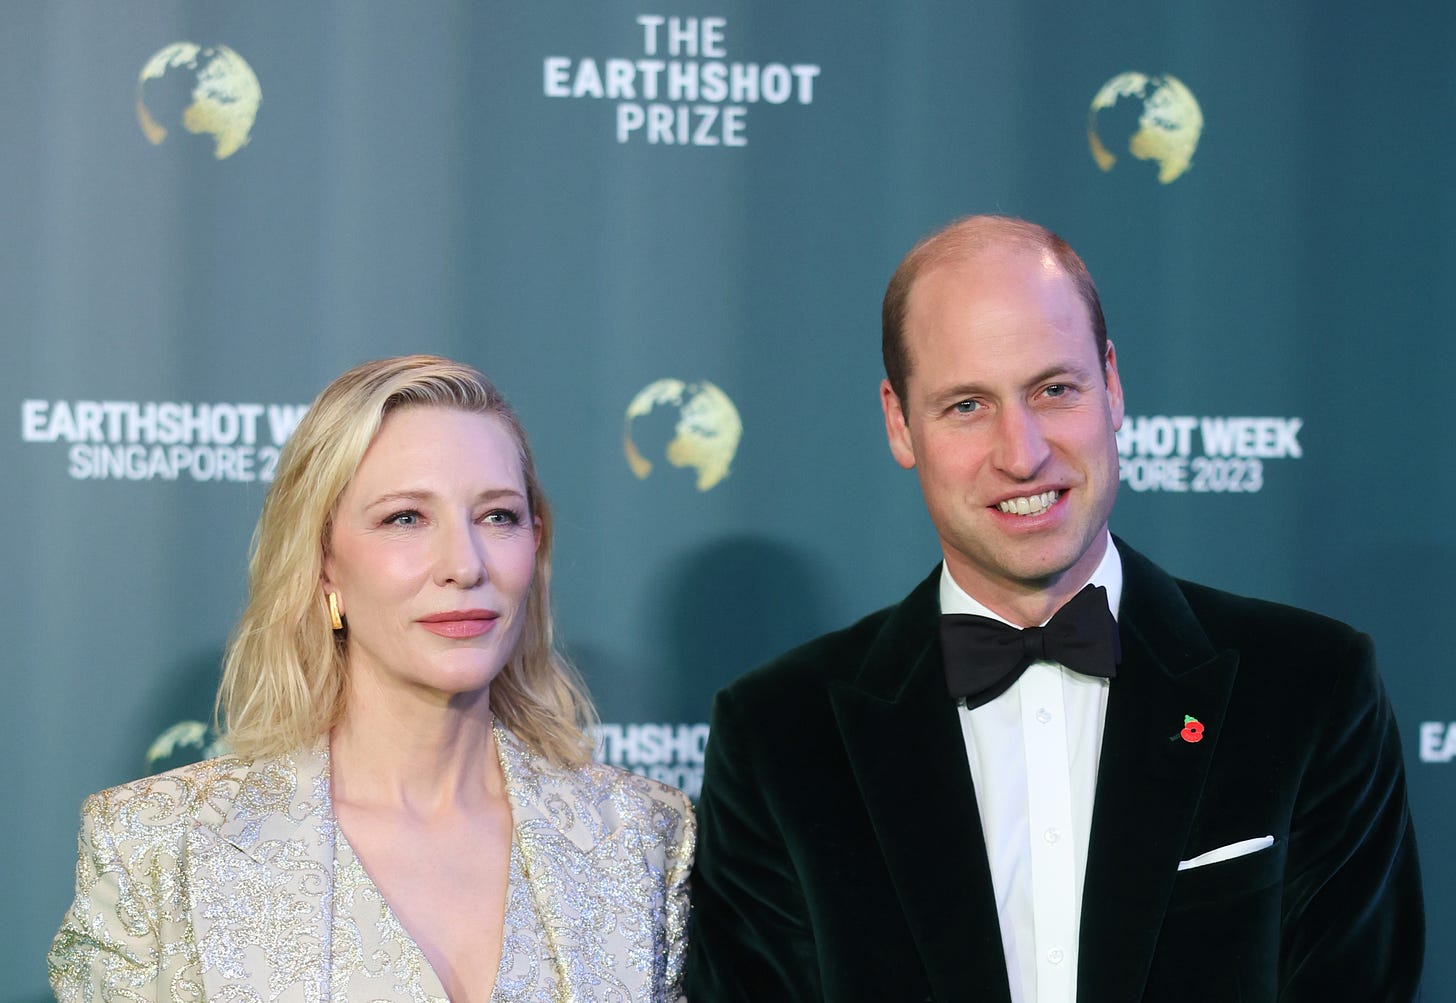 Prince William in a tuxedo standing next to Cate Blanchett at Earthshot Awards